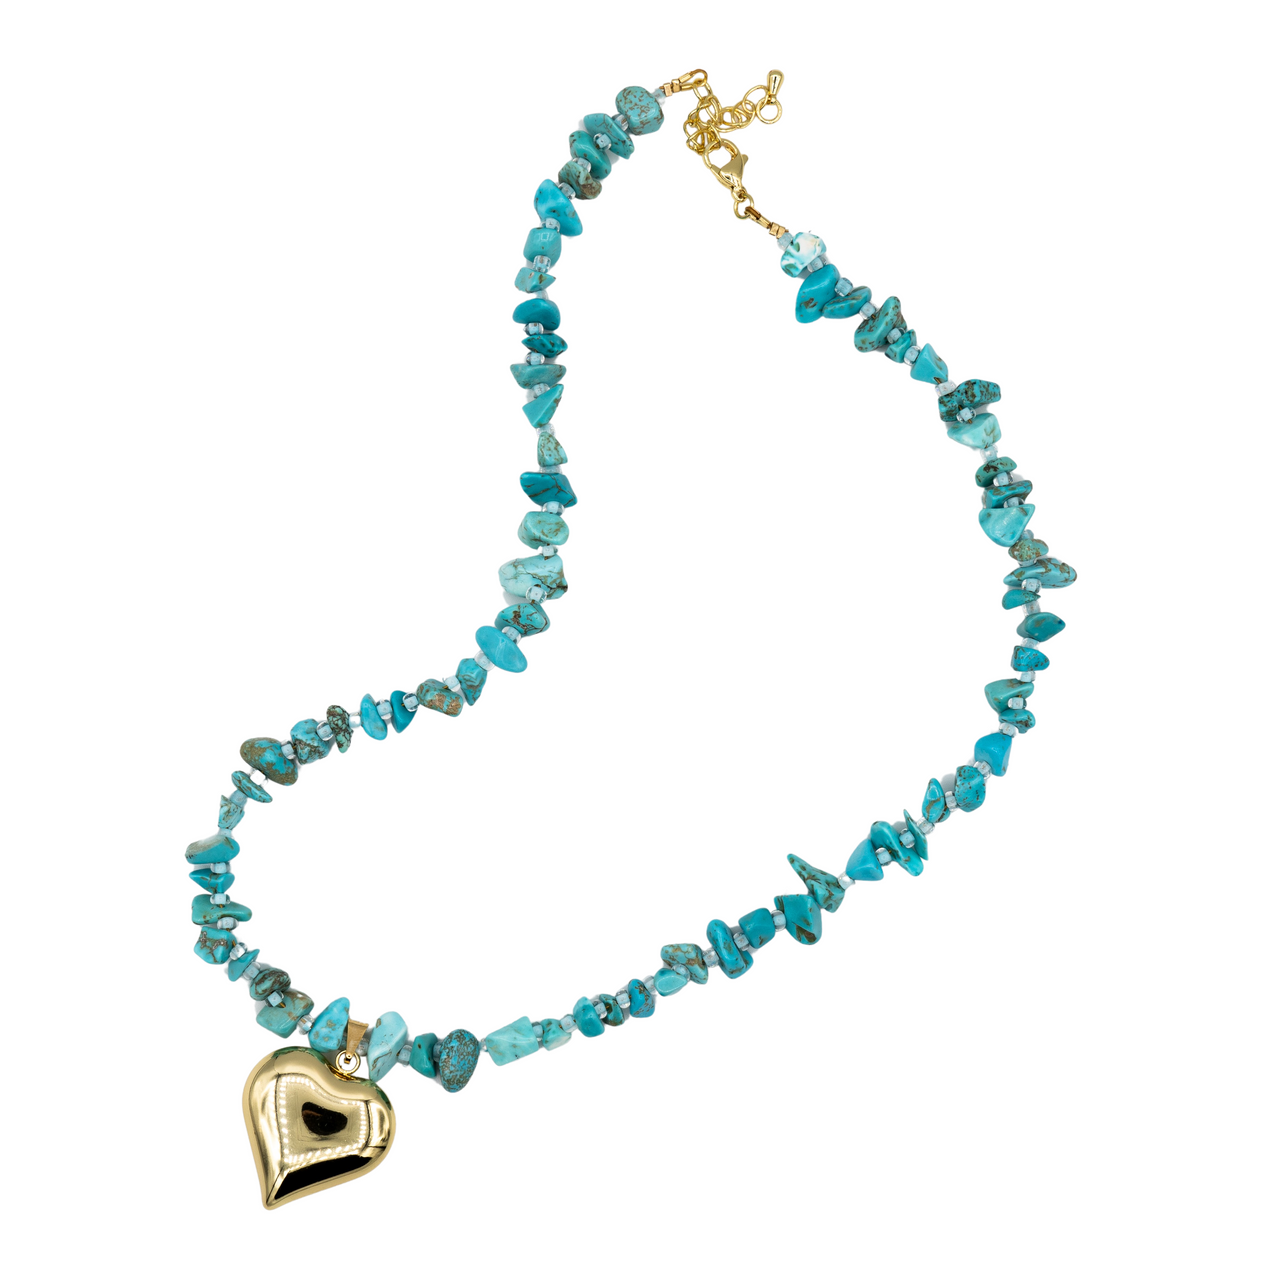 The Turquoise Heart Beaded Necklace